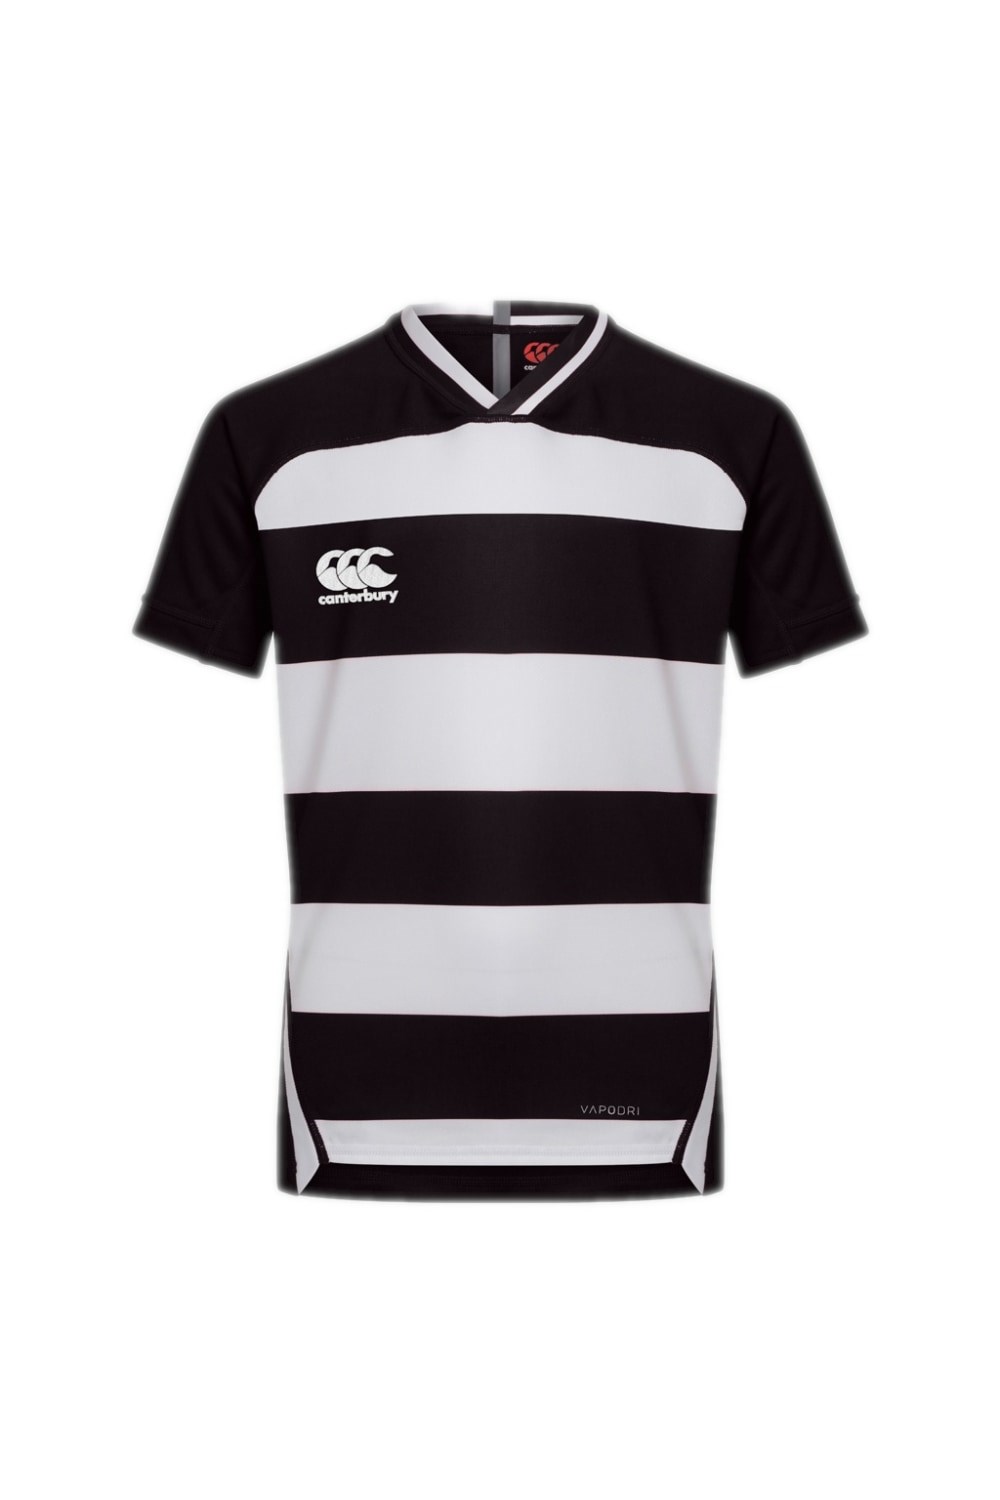 Evader Kids Hooped Rugby Jersey -